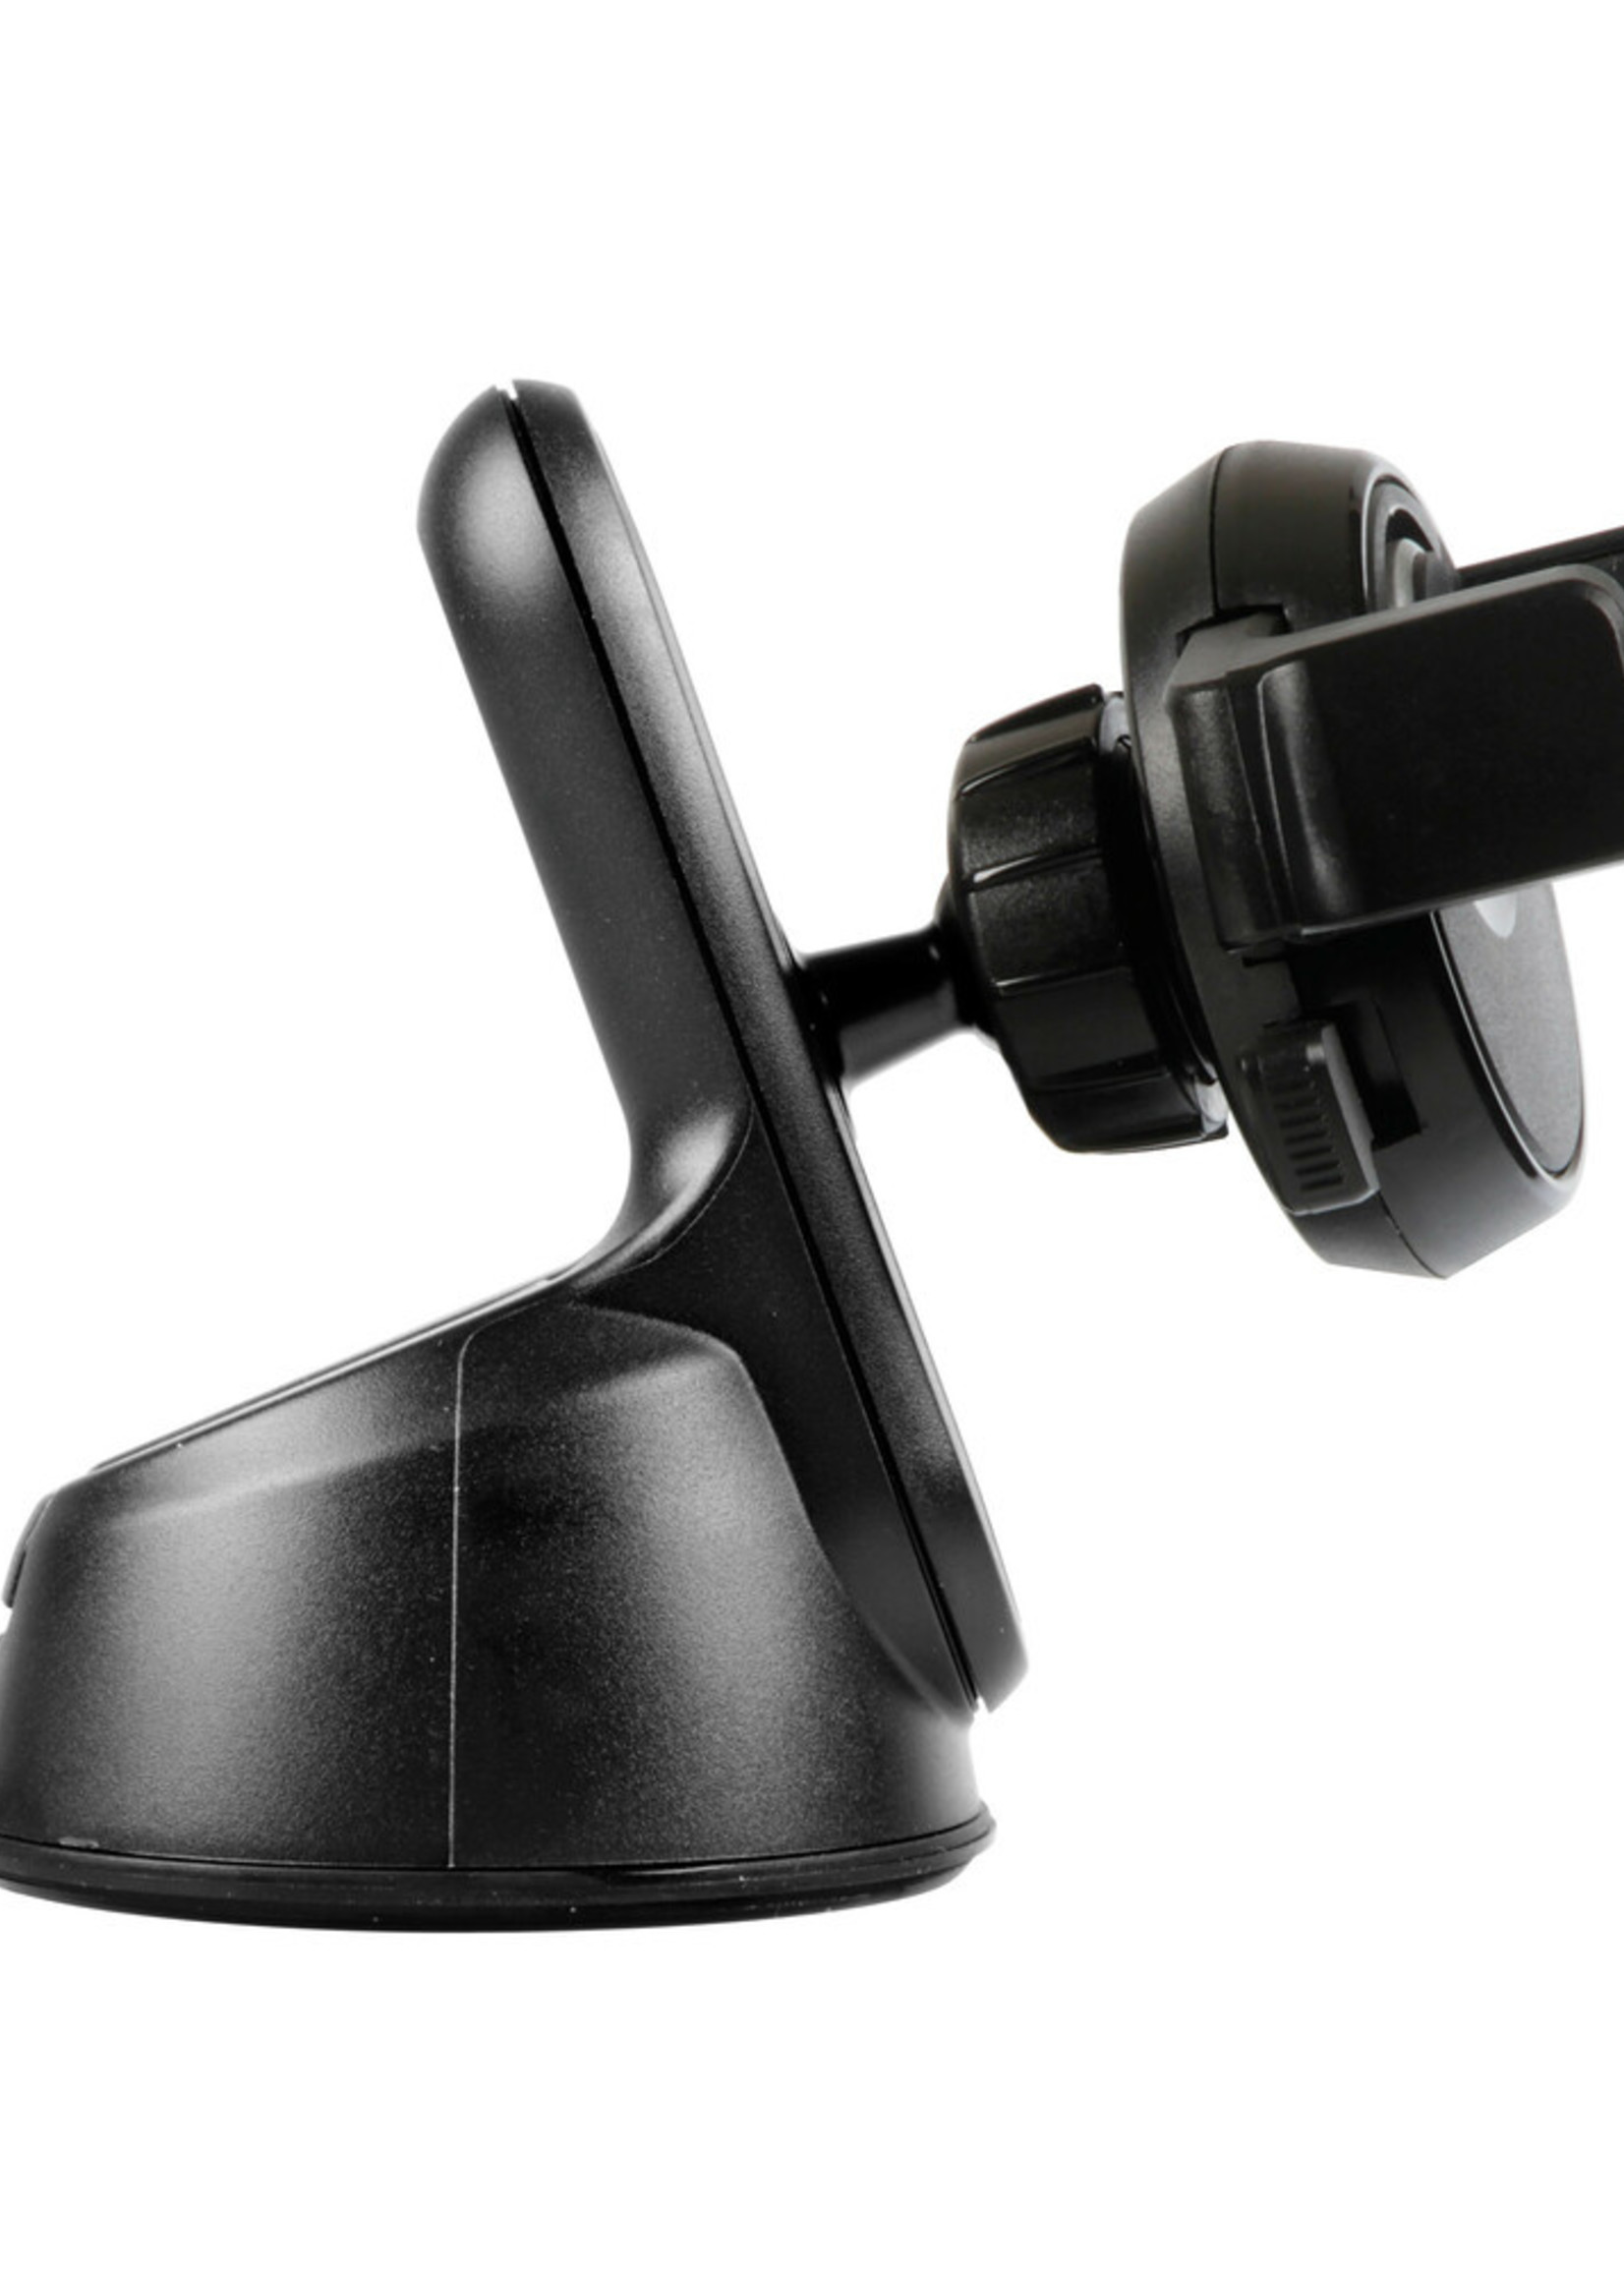 Optiline Atmos Elevator, phone holder with sticky suction cup